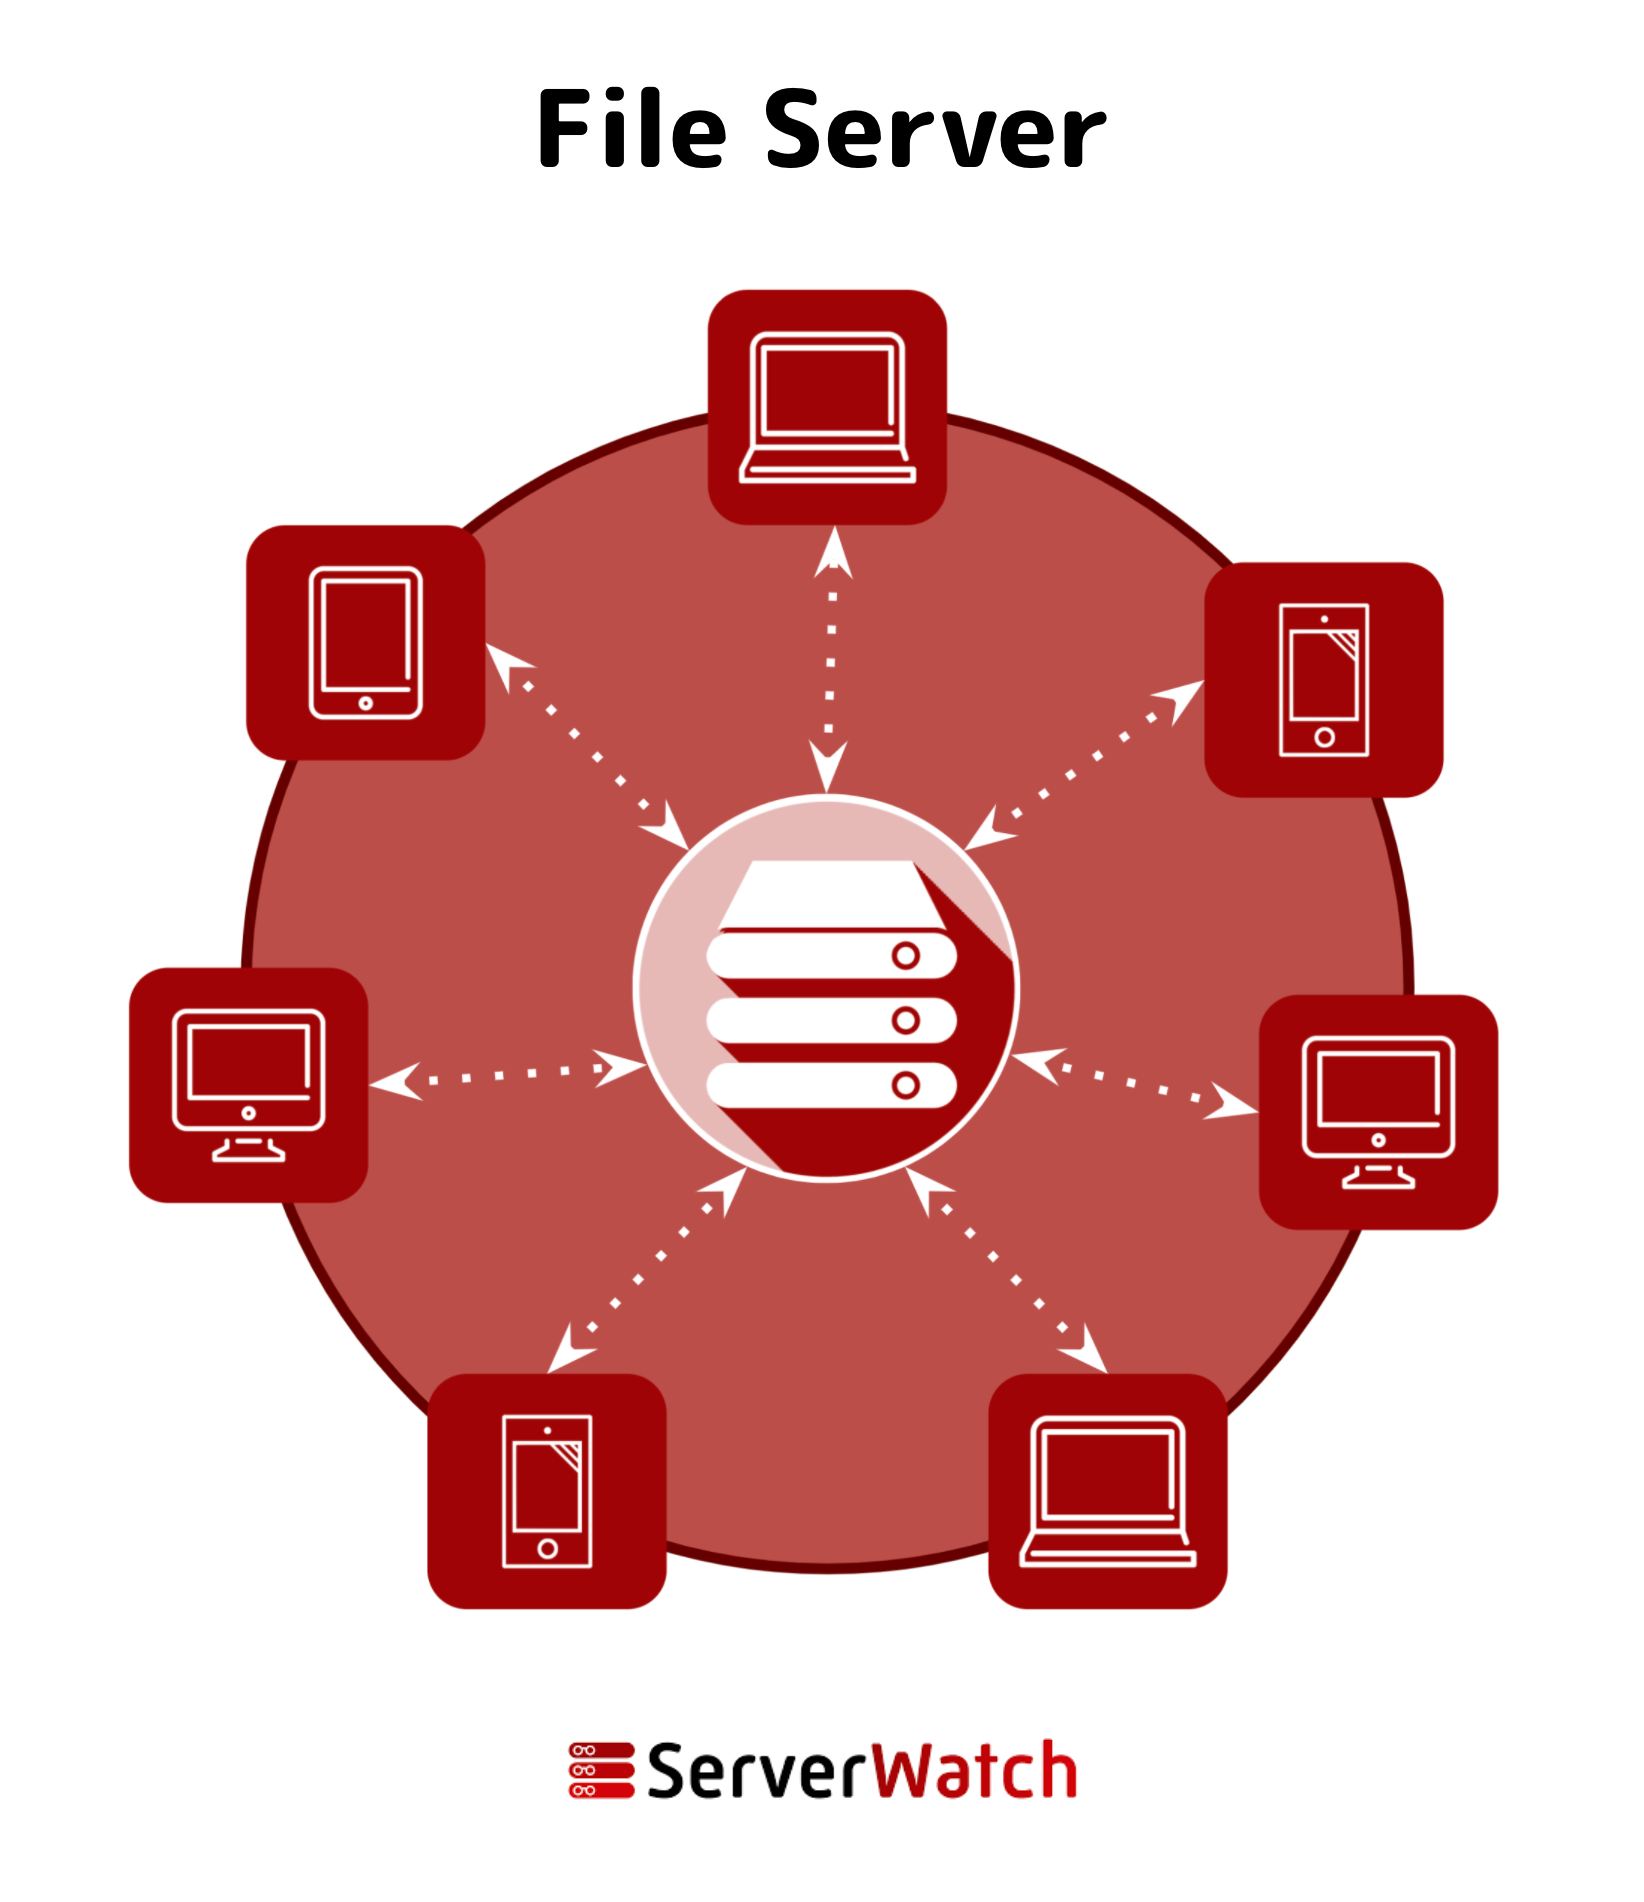 A graphic of how a file server sends and receives resources from a network of devices and users. Designed by Sam Ingalls.